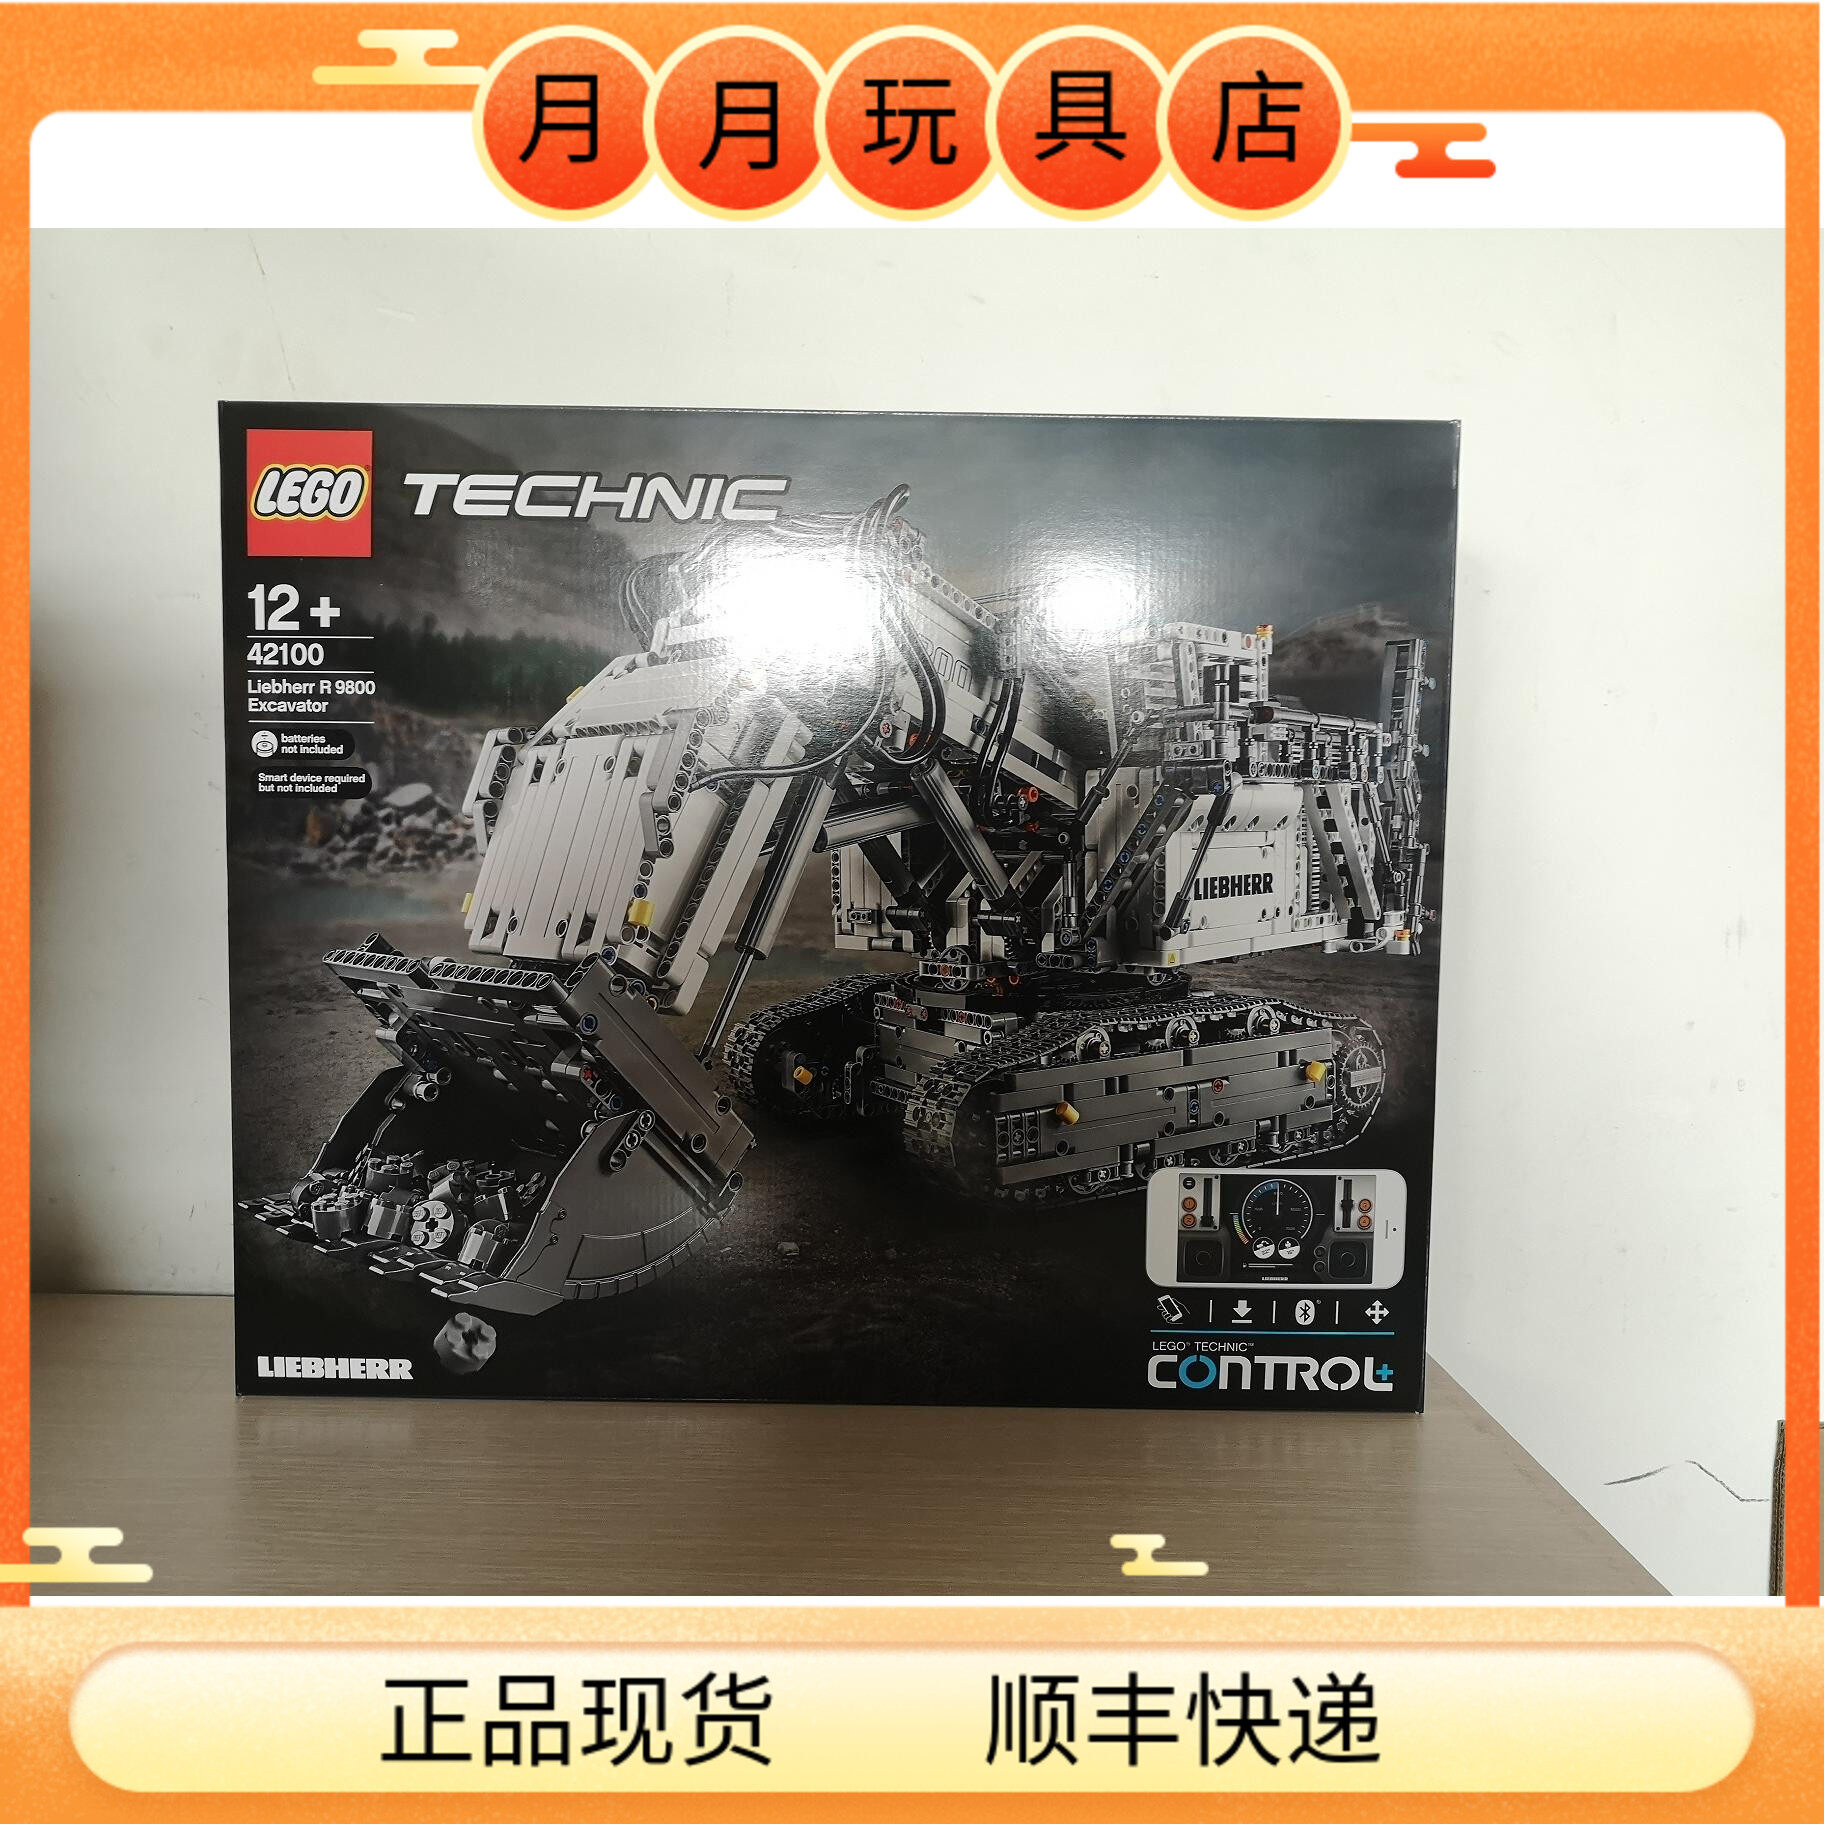 LEGO Lego building block technology series 42110 Land Rover / 42100 full remote control excavator shipped from Beijing